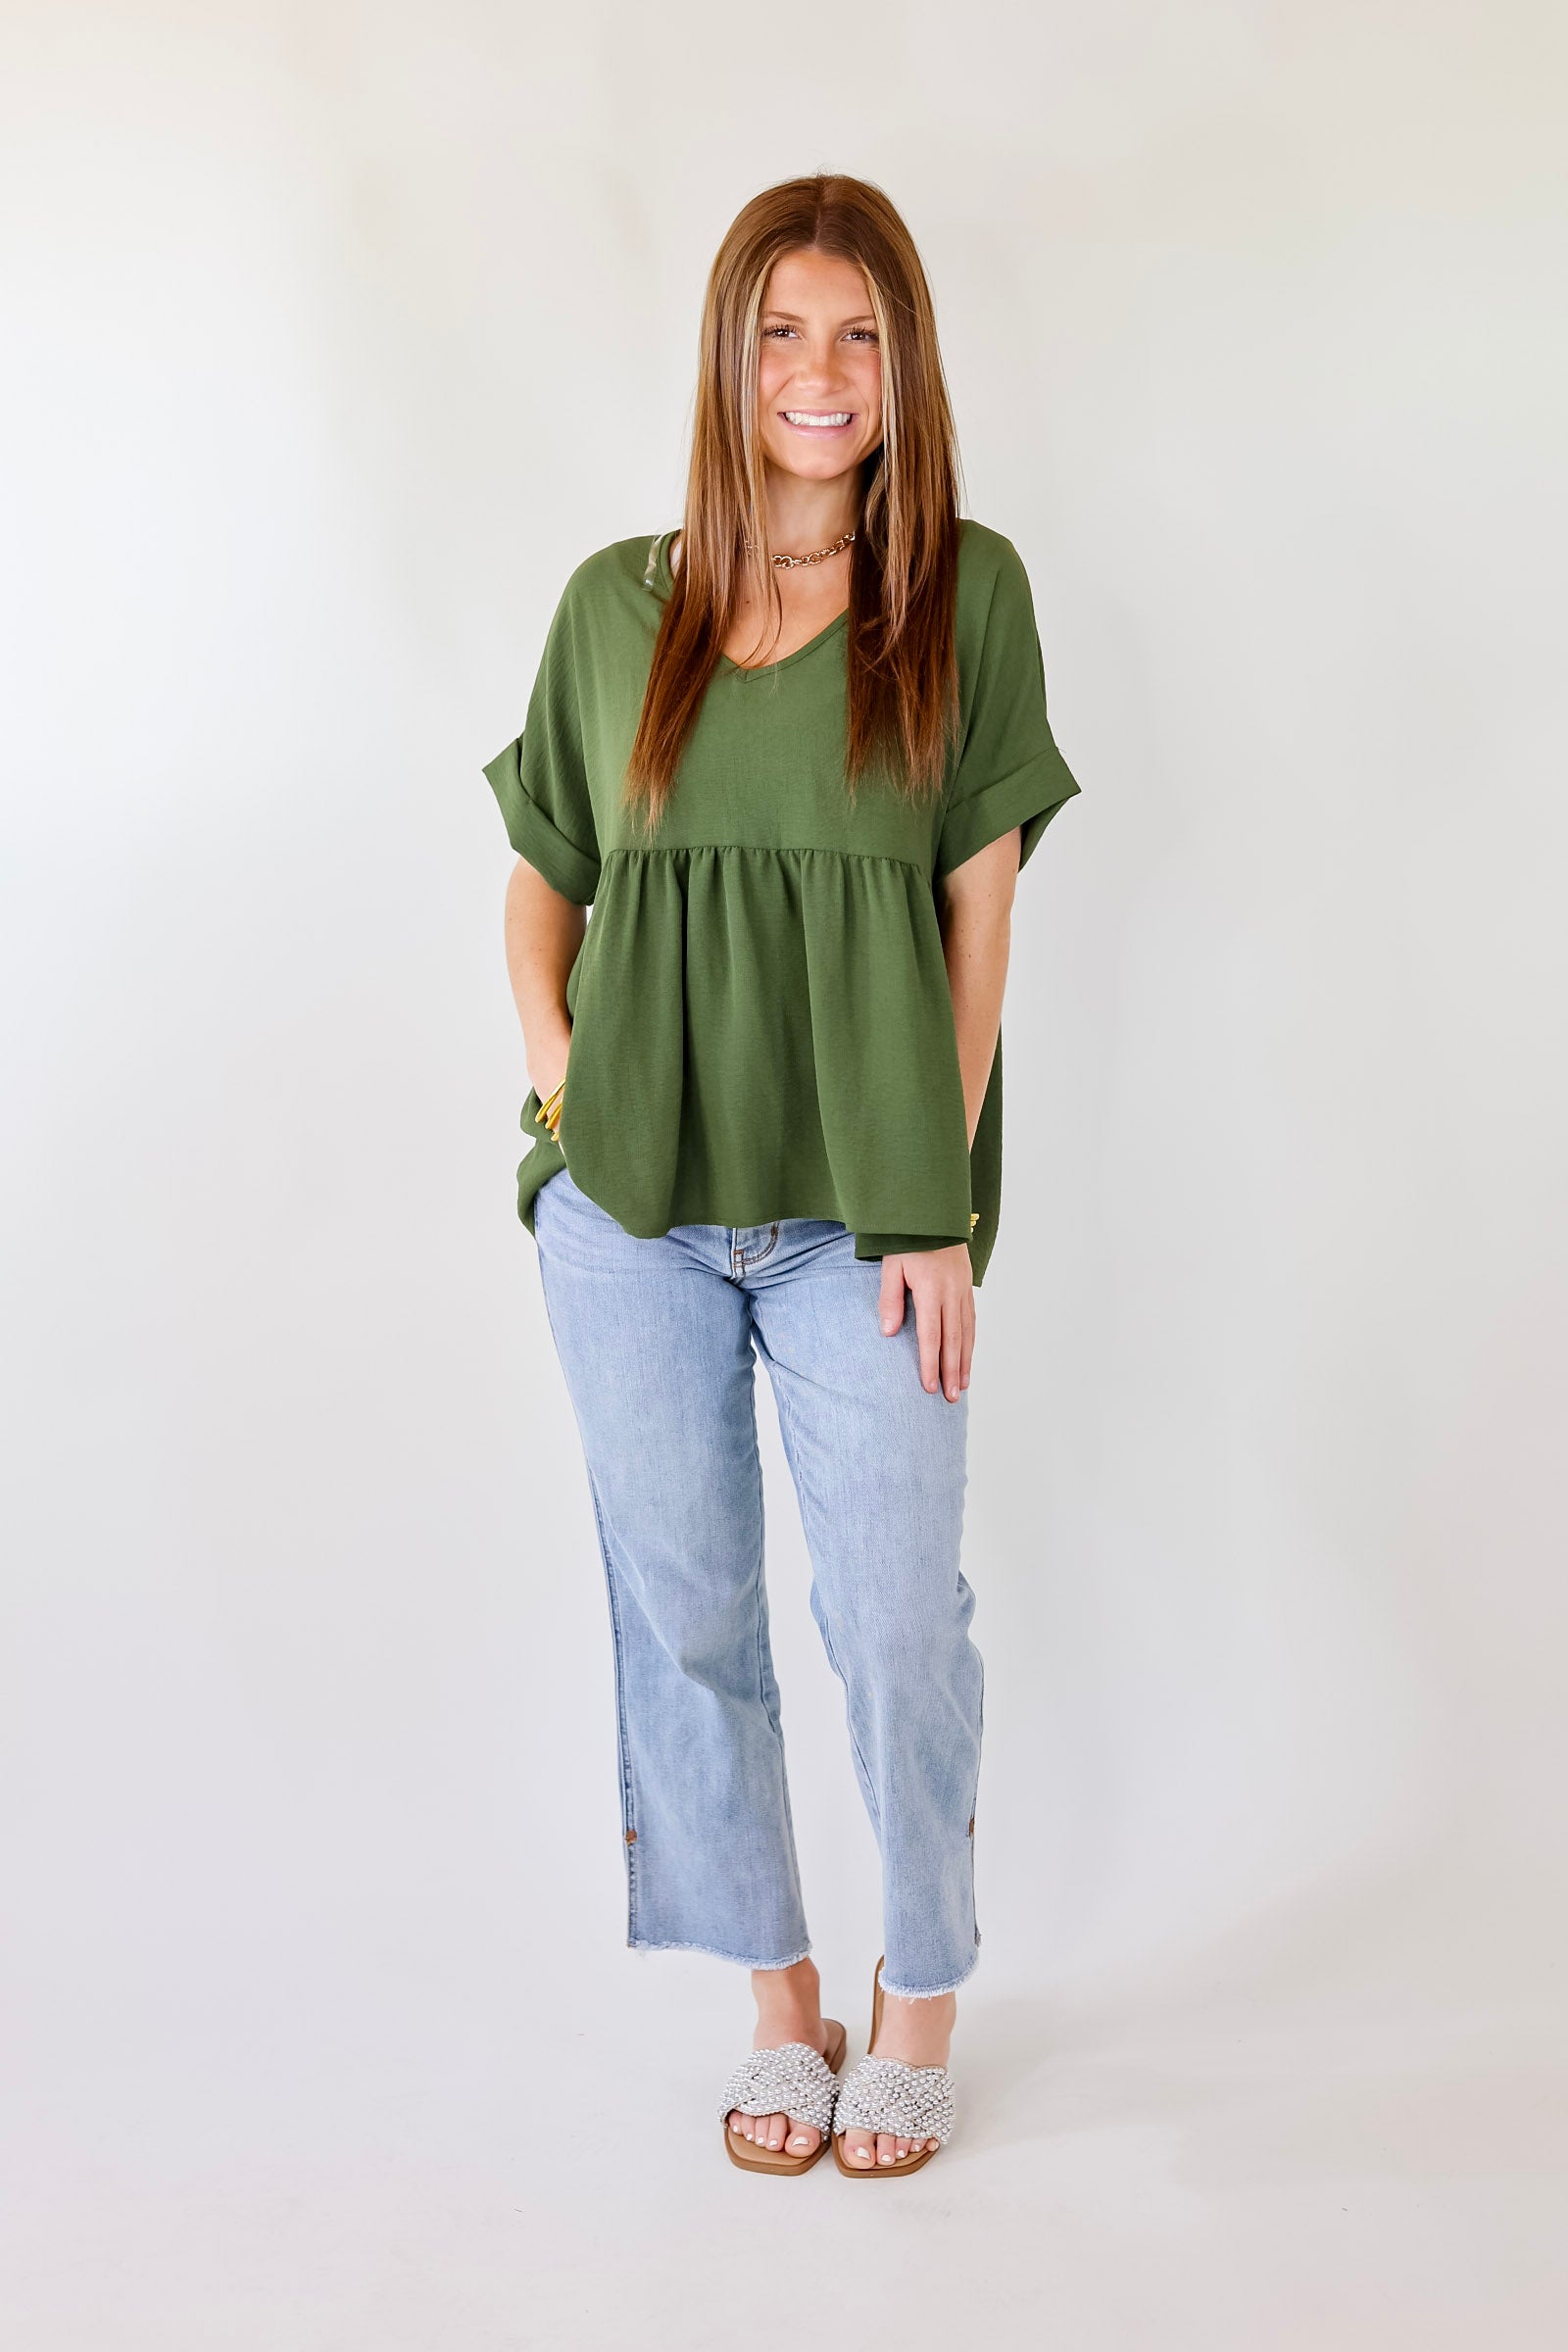 Touring the City Short Sleeve V Neck Babydoll Top in Olive Green - Giddy Up Glamour Boutique